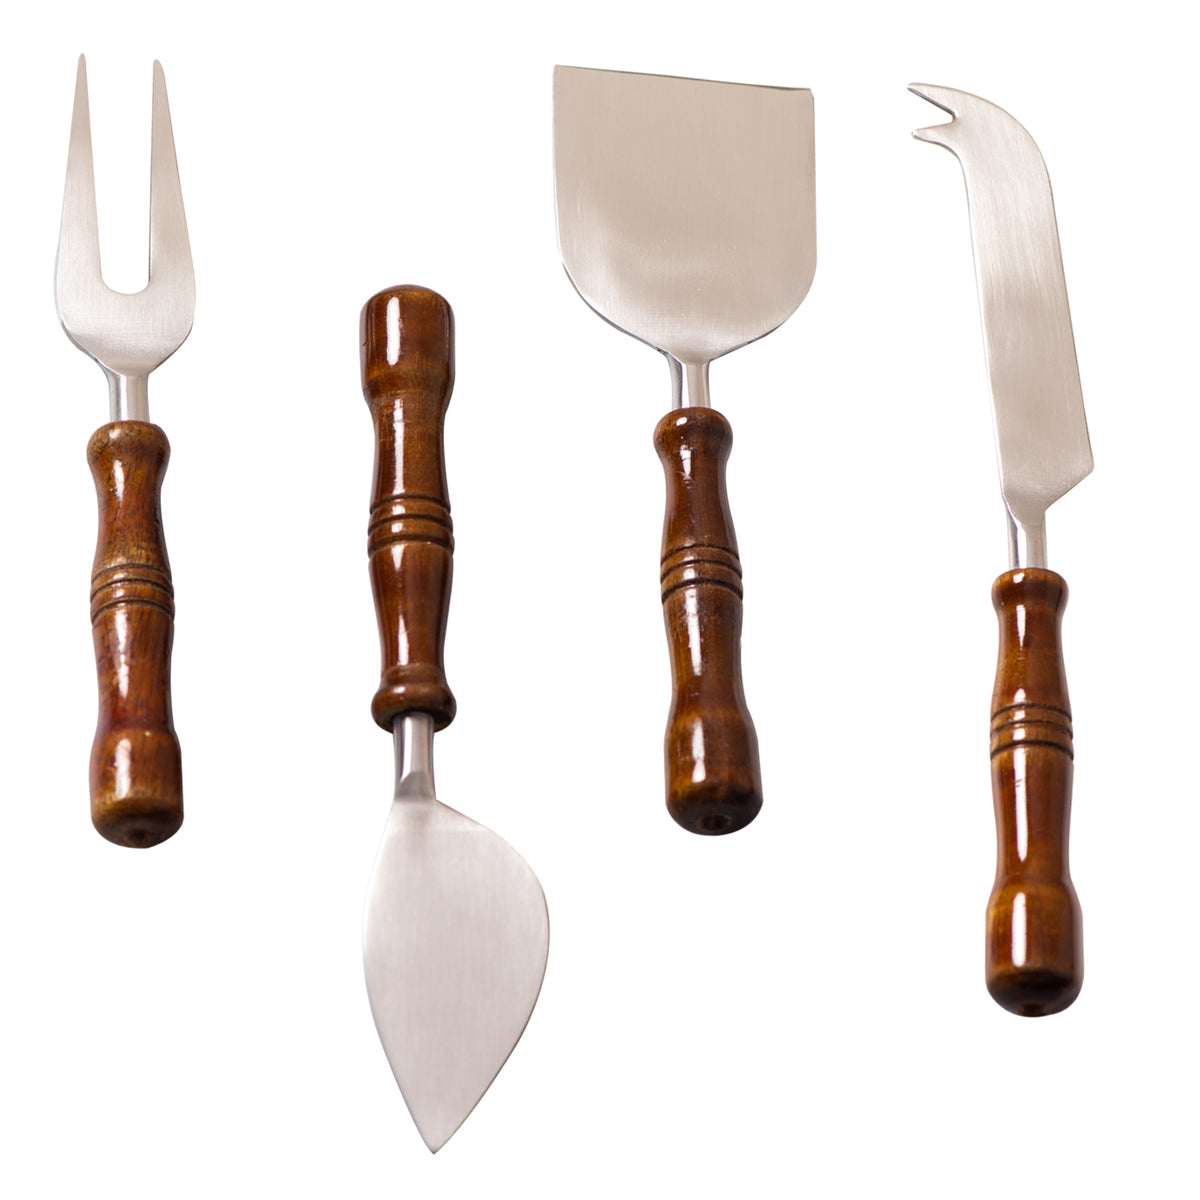 Eve Cheese Knife - Set Of 4